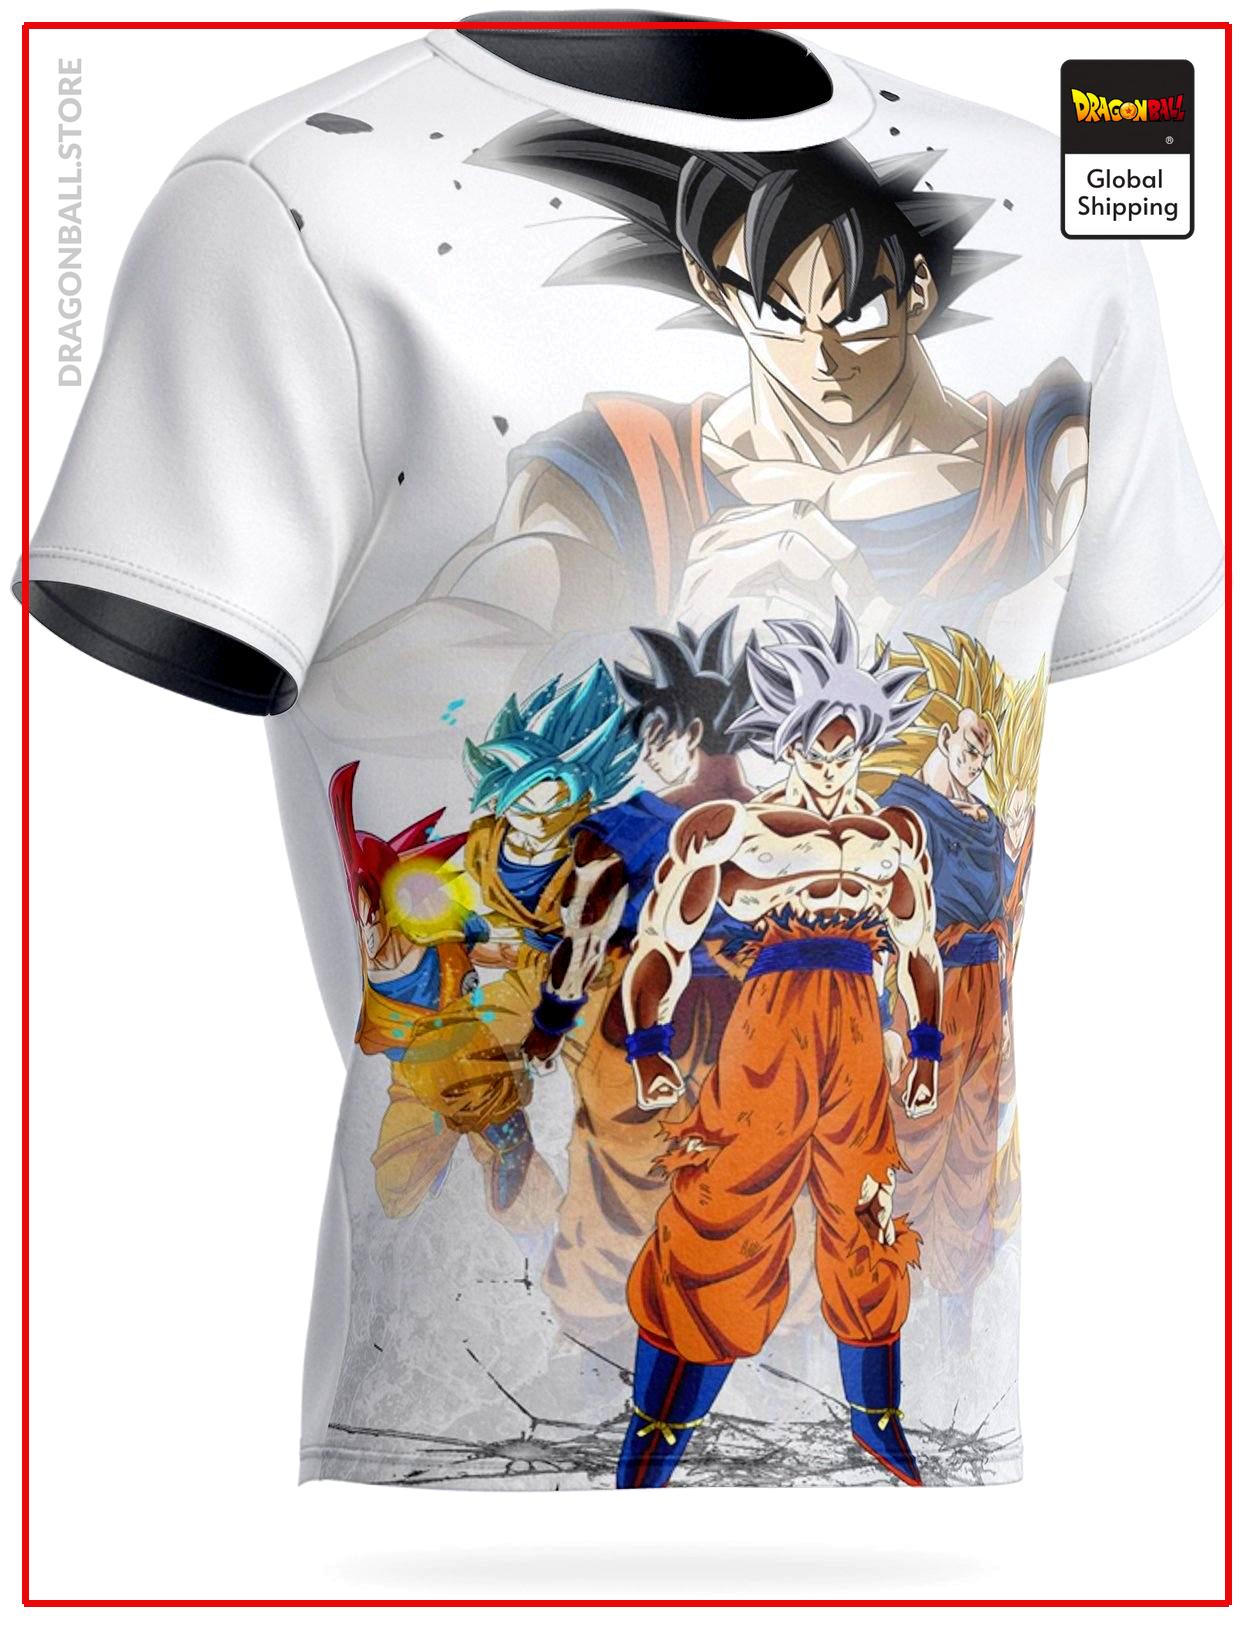 Infuse Your Look with Anime Energy: Rock Dragon Ball Merch